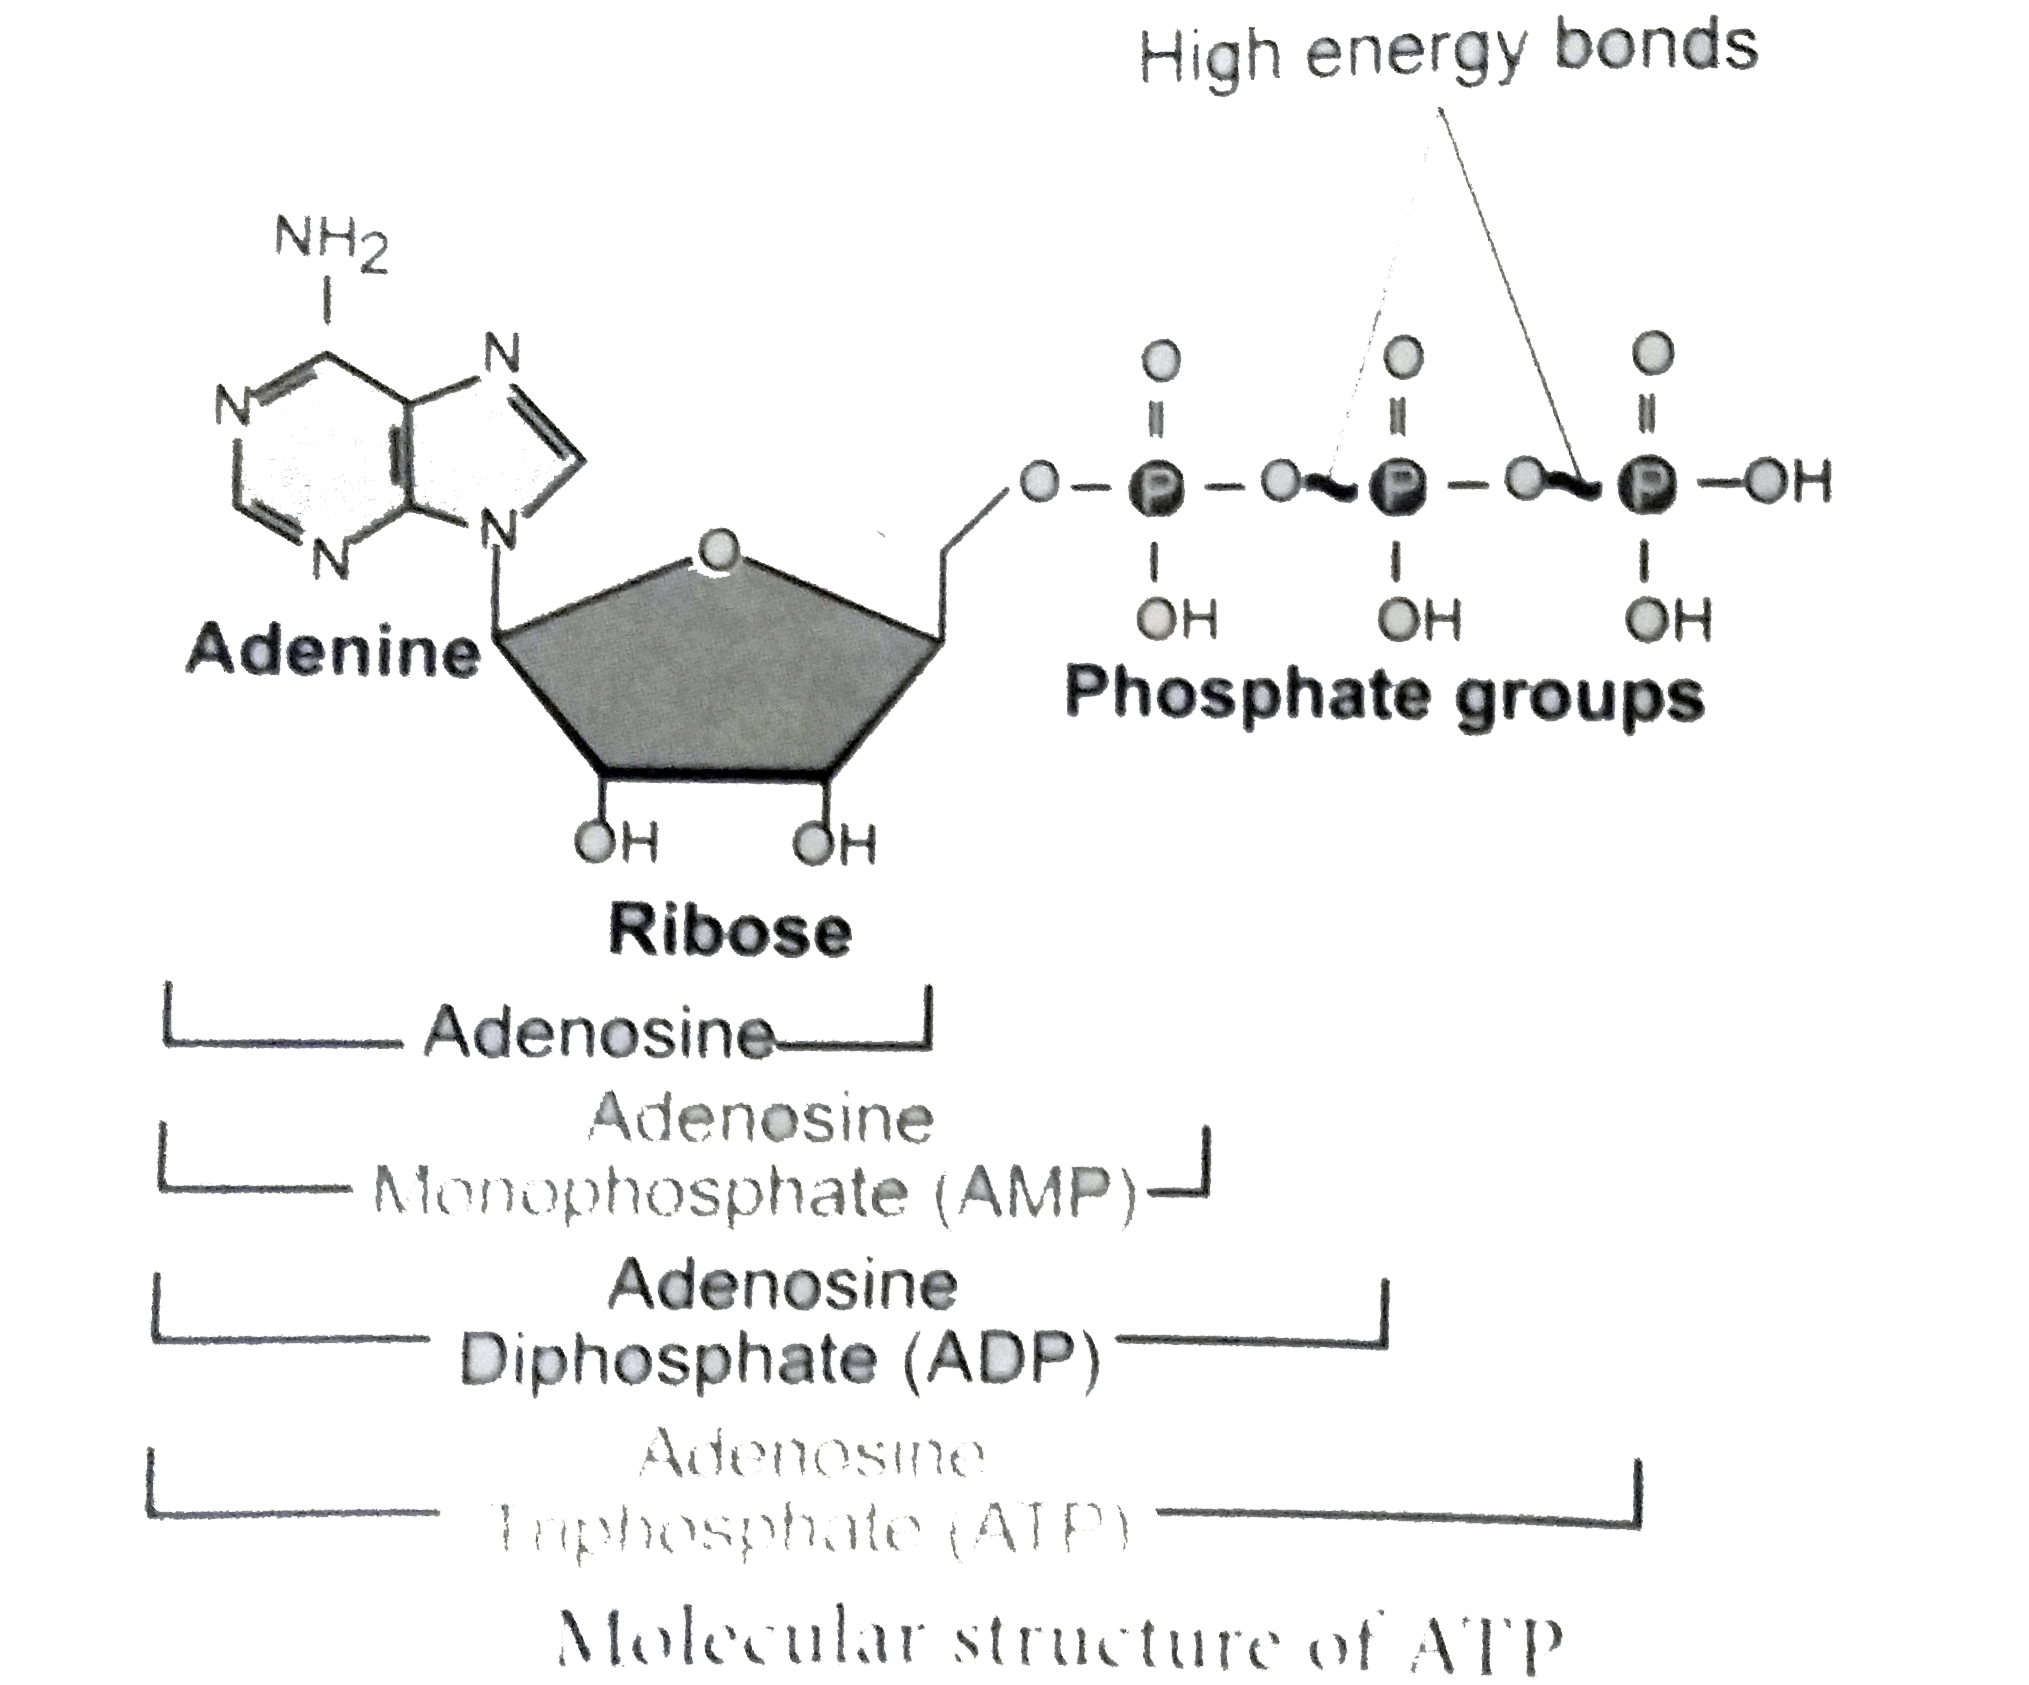 What is structure of ATP? - Quora